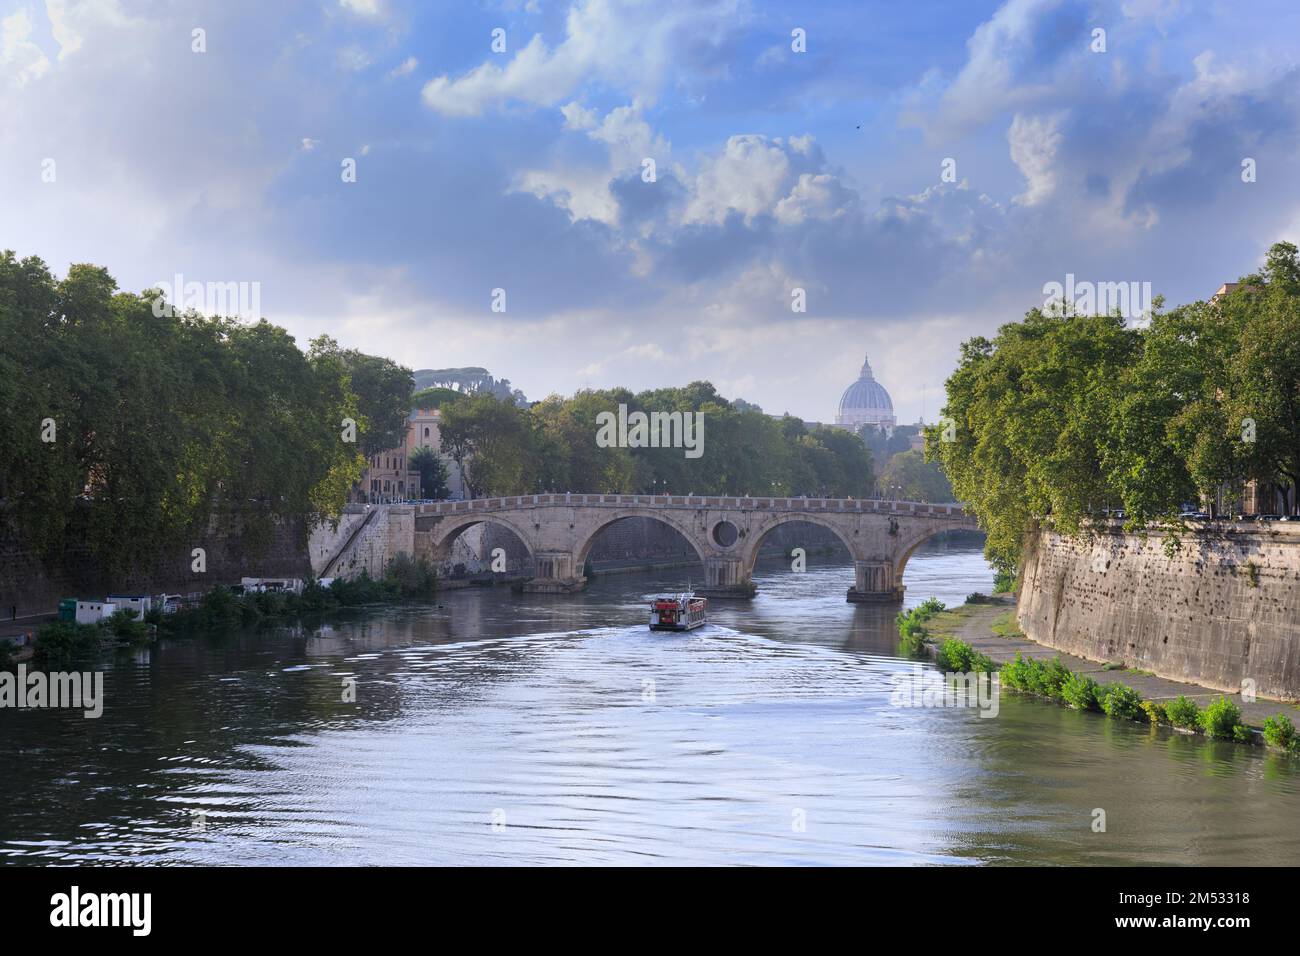 Urban view of Rome in Italy: River Tiber with Ponte Sisto and St. Peter's Basilica in the distance. Stock Photo